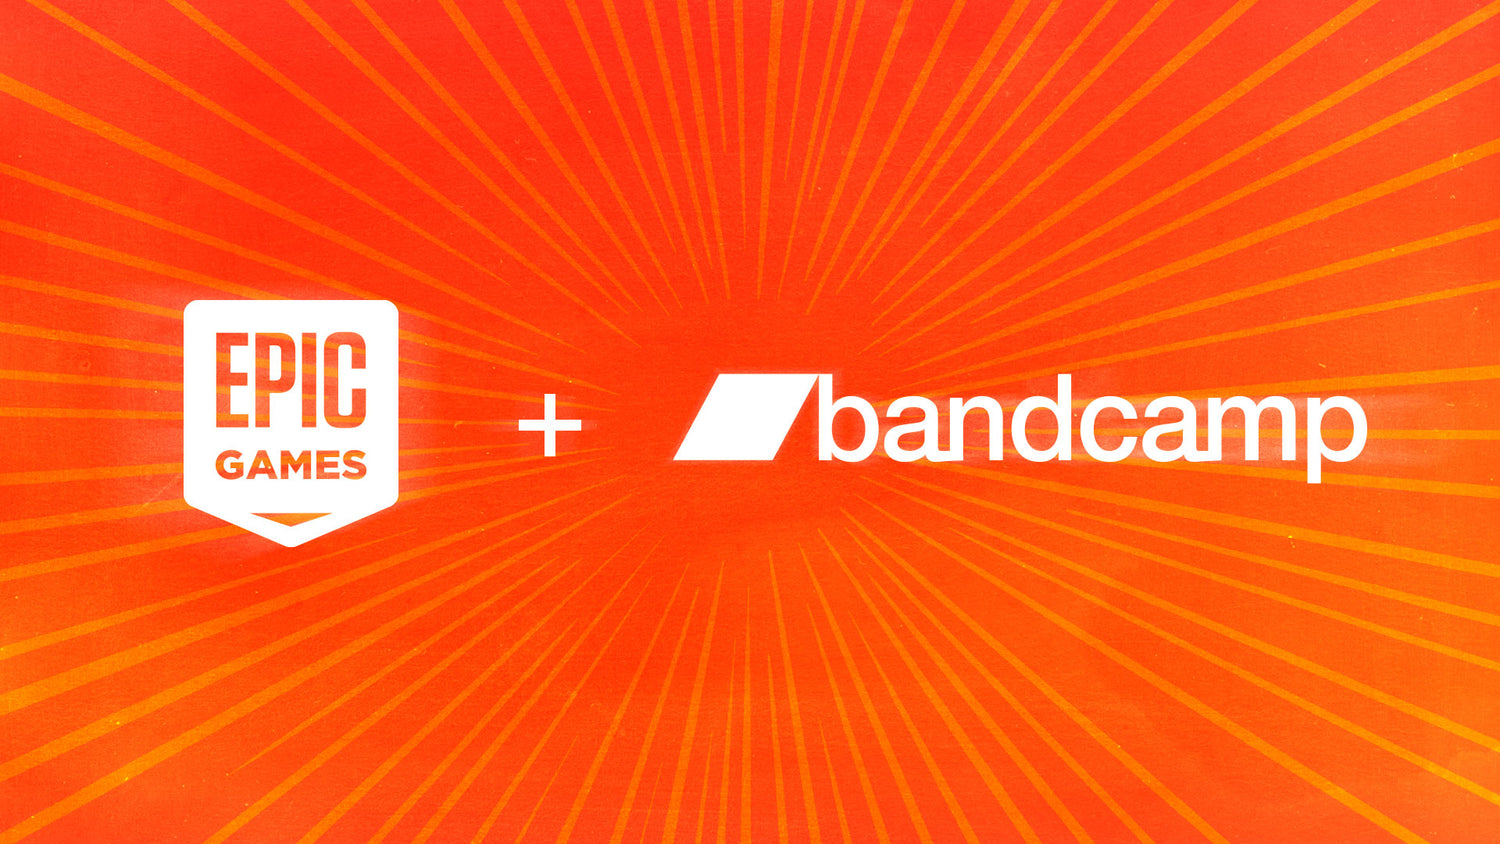 Fortnite developer Epic Games has acquired Bandcamp